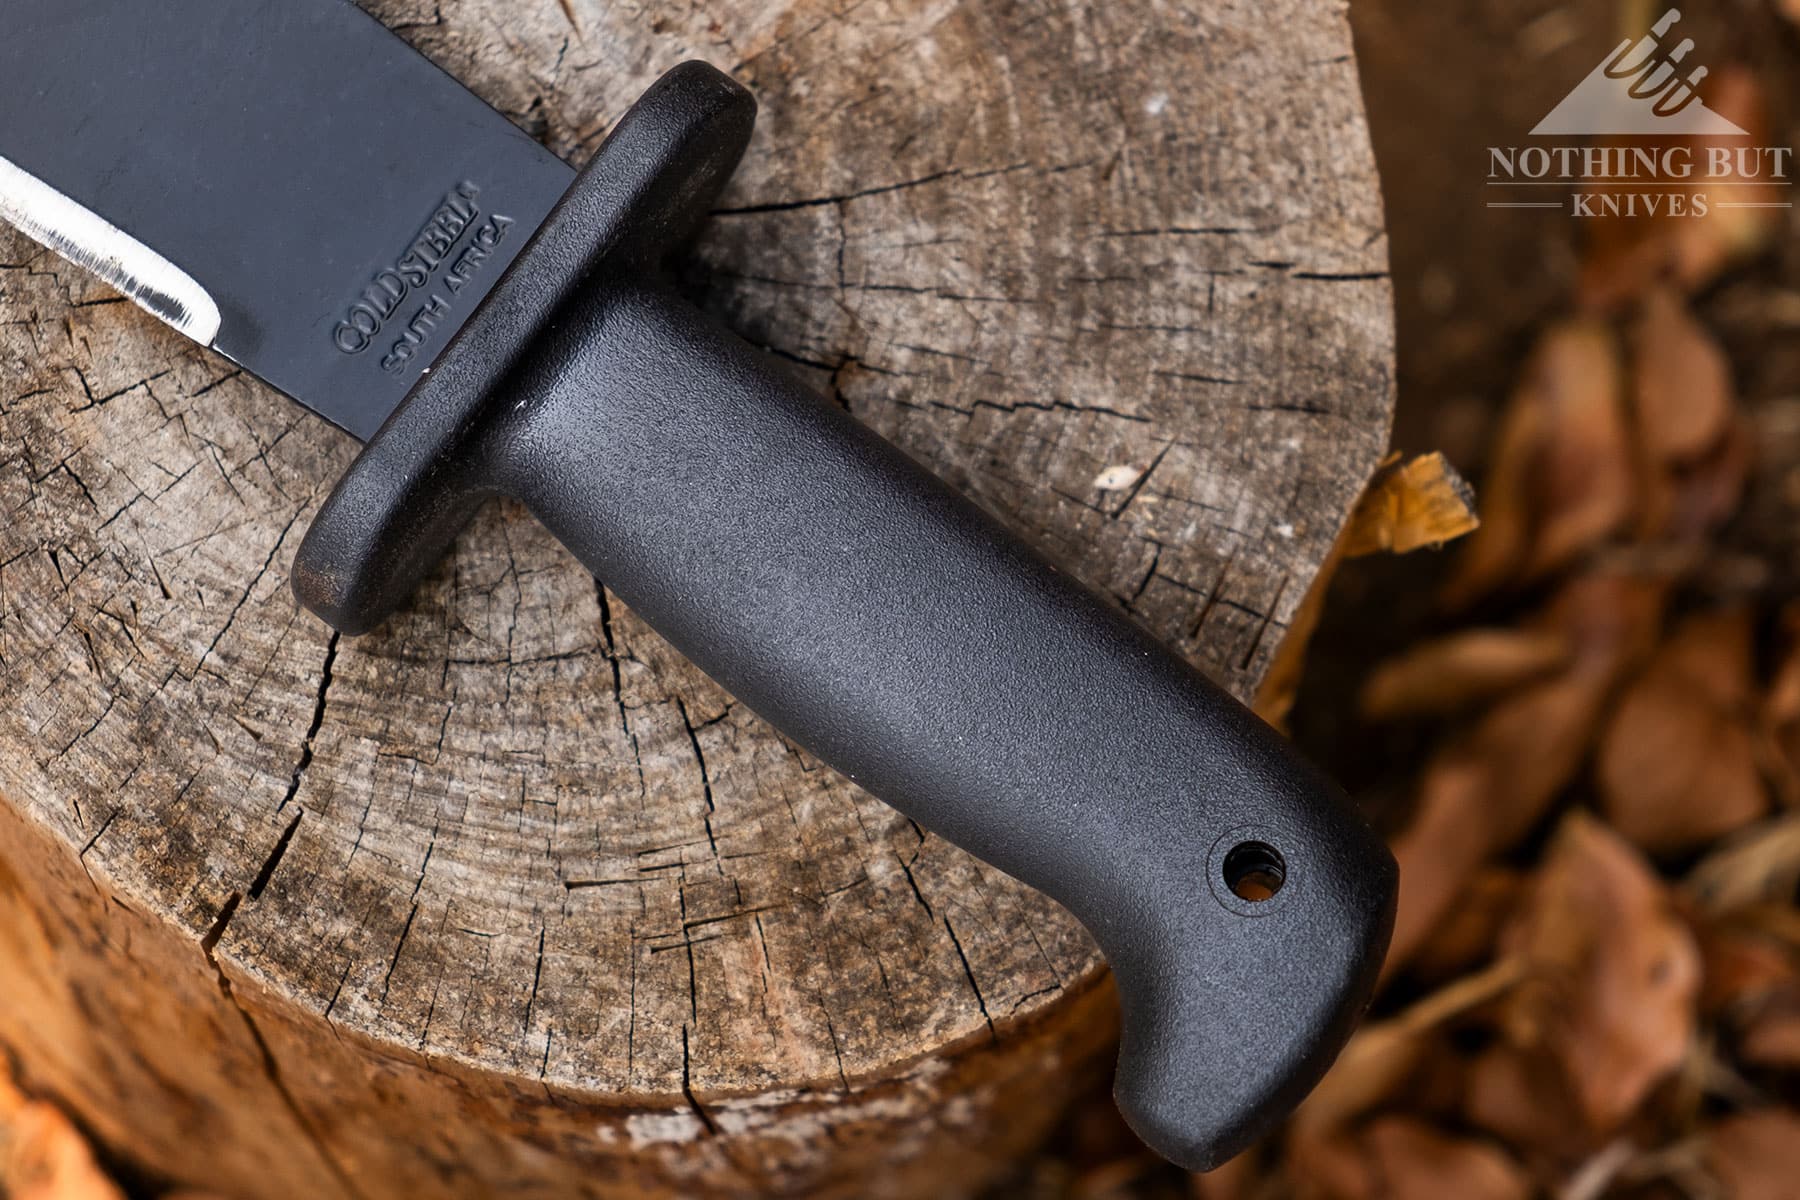 A close-up of the Polypropylene handle of the Cold Steel Black Bear Bowie.